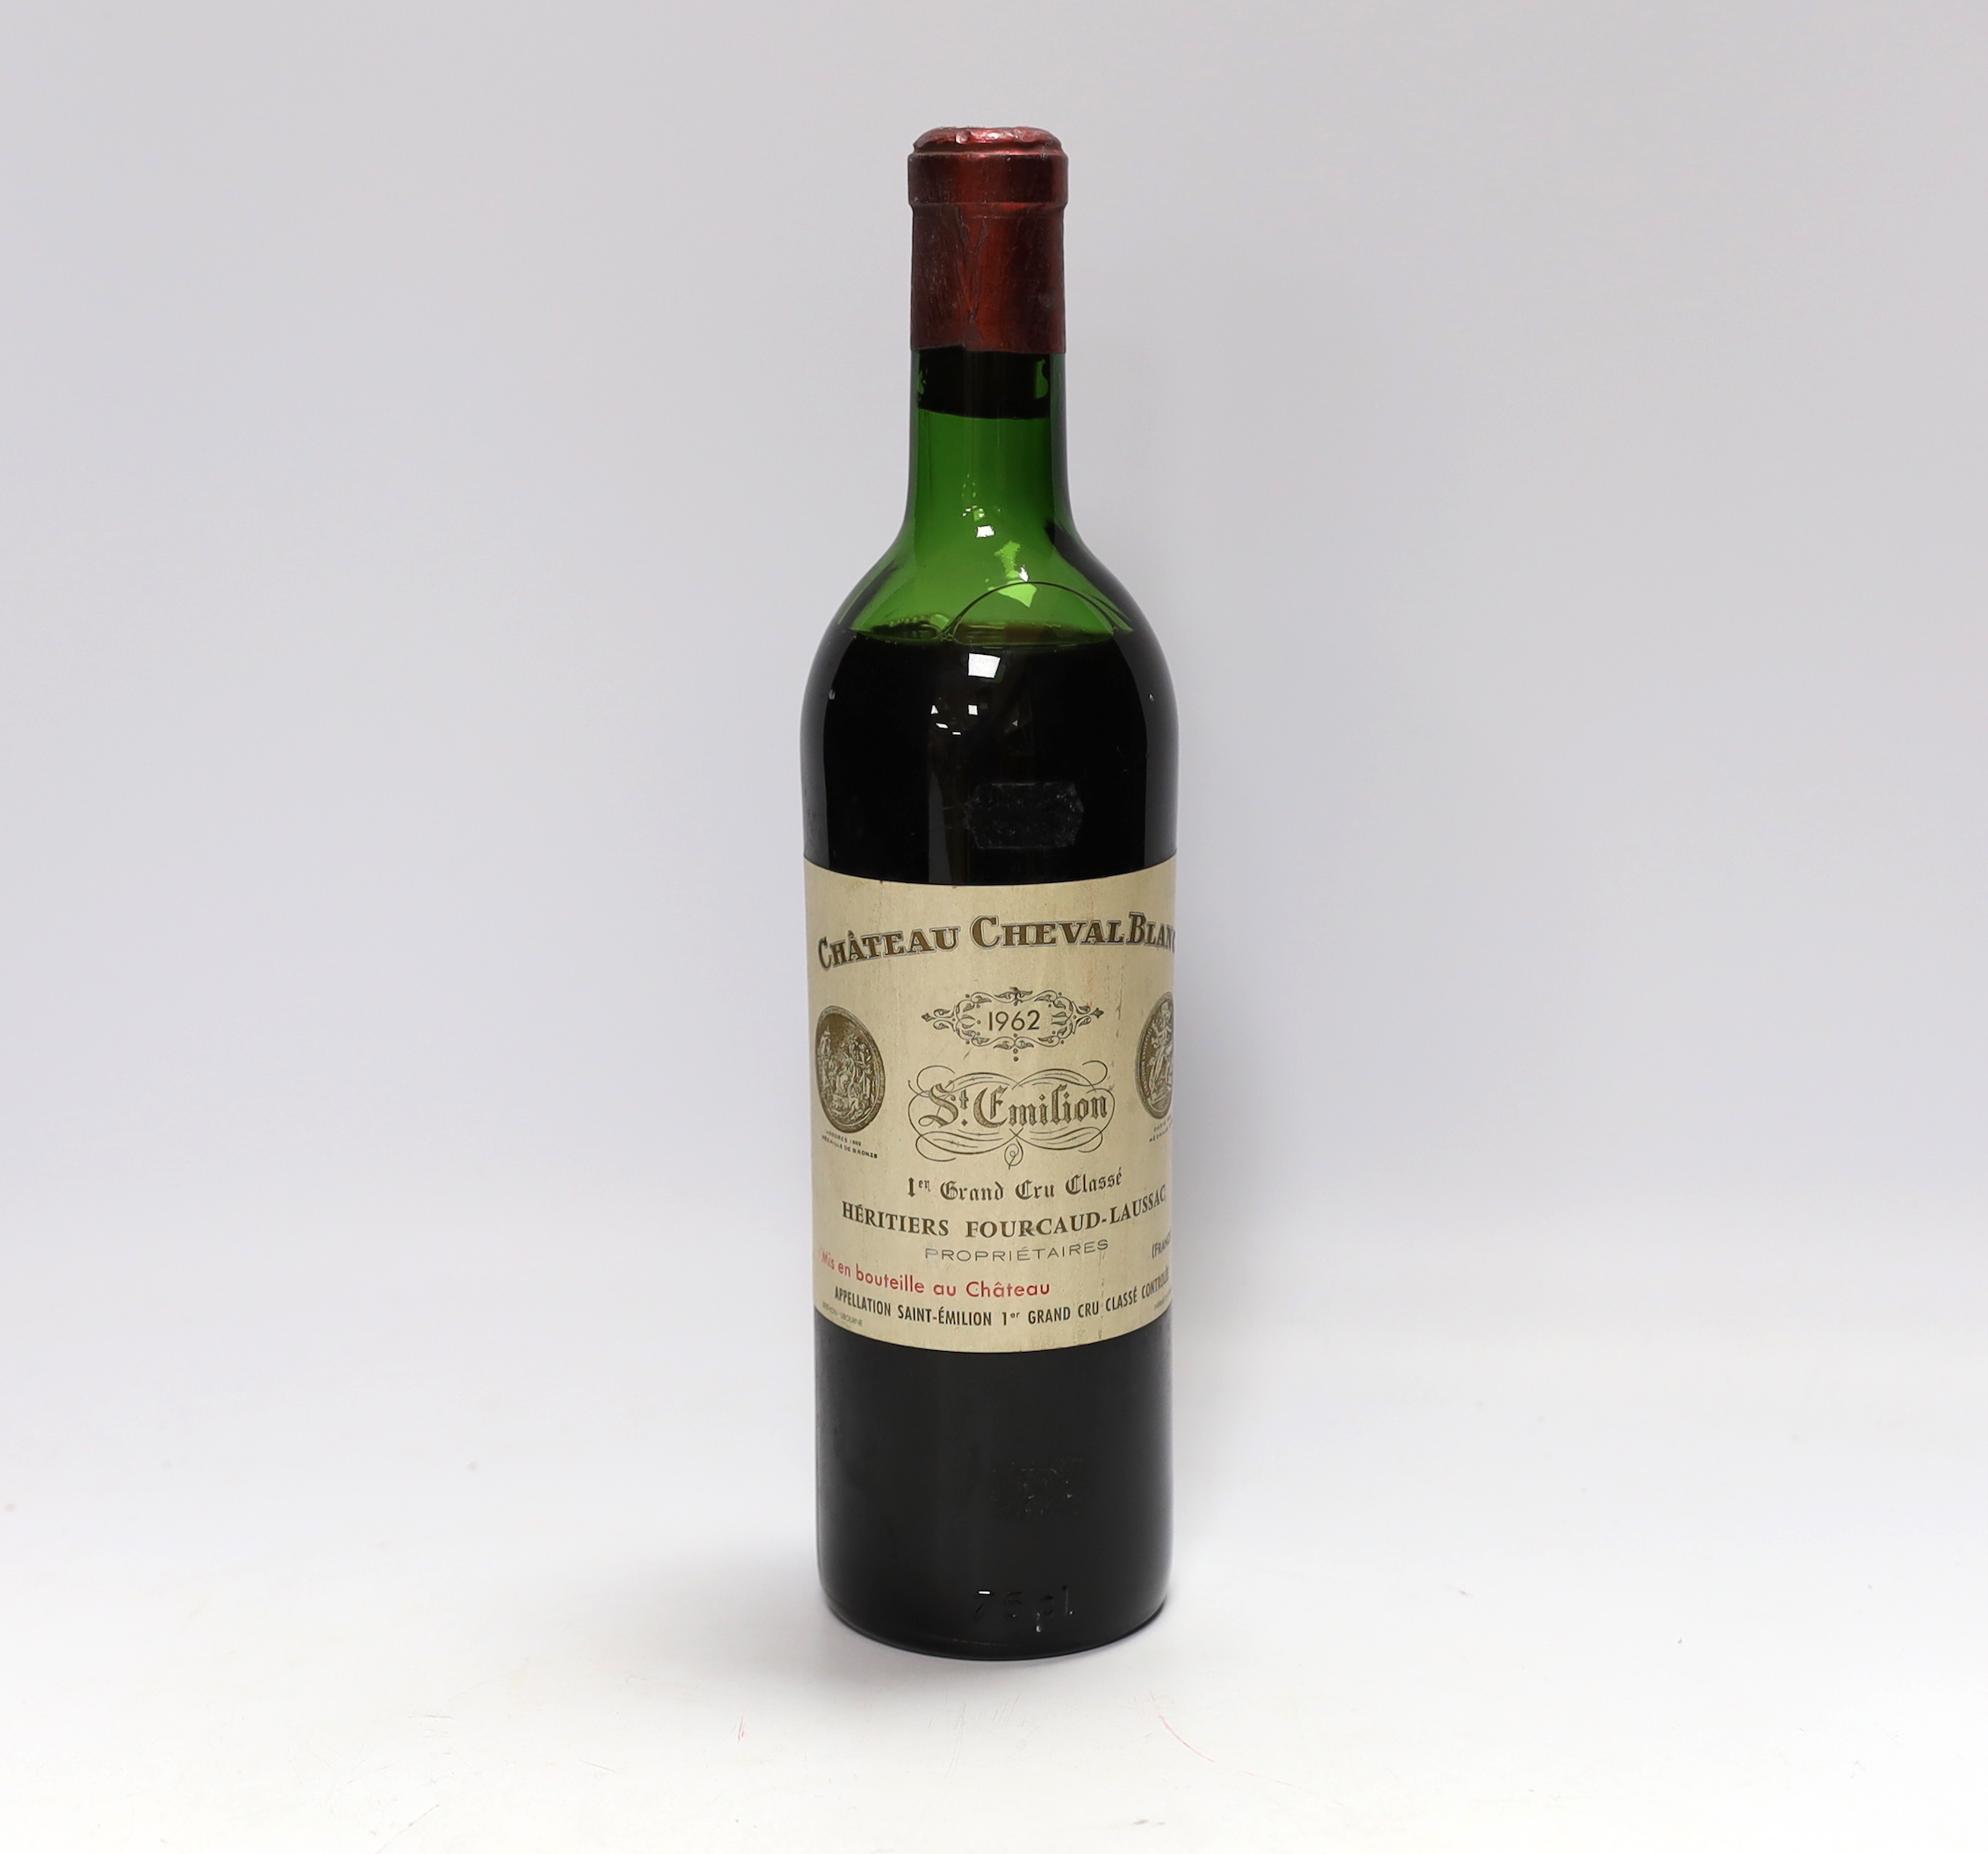 A bottle of Chateau Cheval Blanc 1962